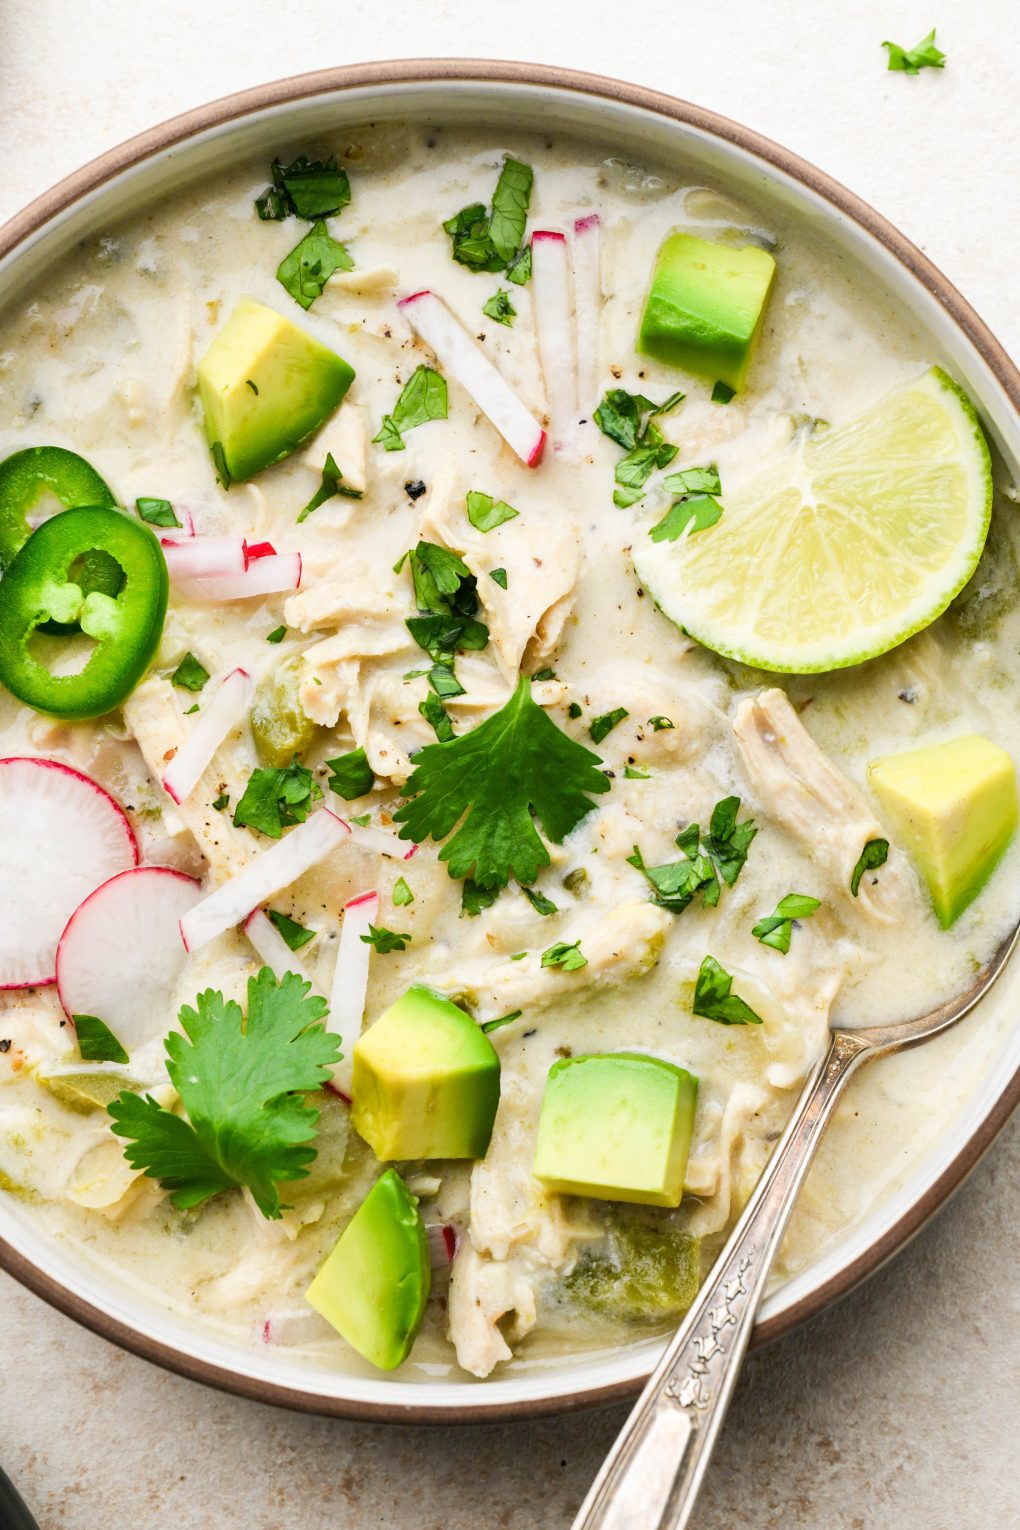 Wide bowl of creamy Whole30 white chicken chili topped with radishes, avocado, cilantro, and lime wedges. On a light cream background.